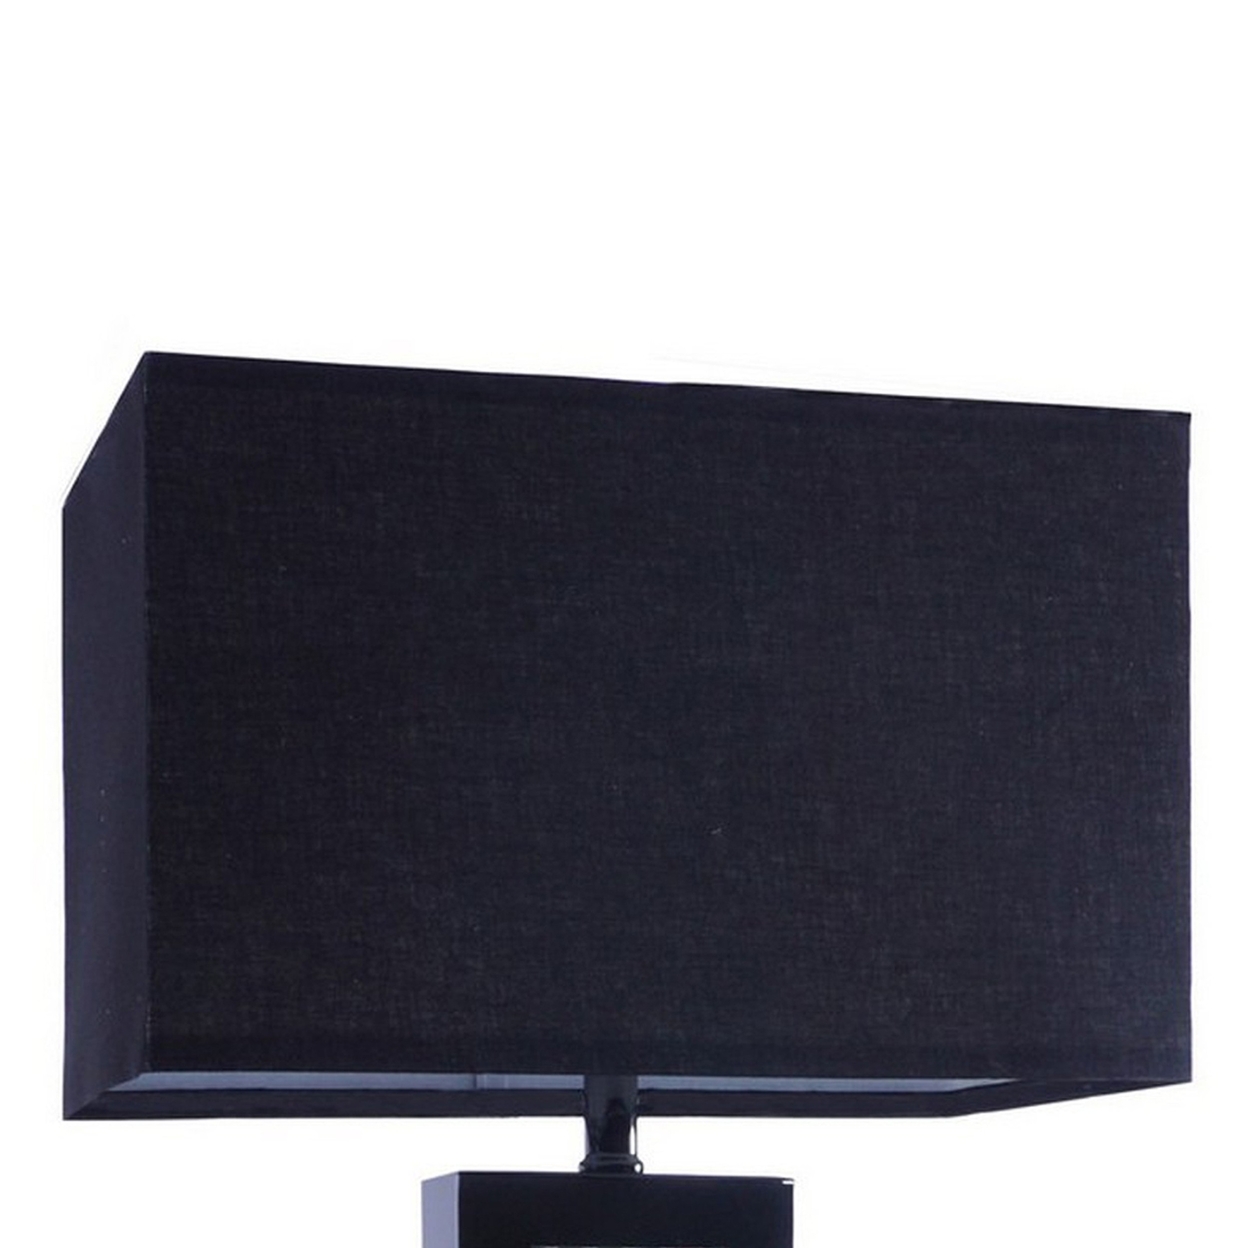 28 Inch Nickel Table Lamp, Black Fabric Shade, Glass Panel And LED Accents- Saltoro Sherpi